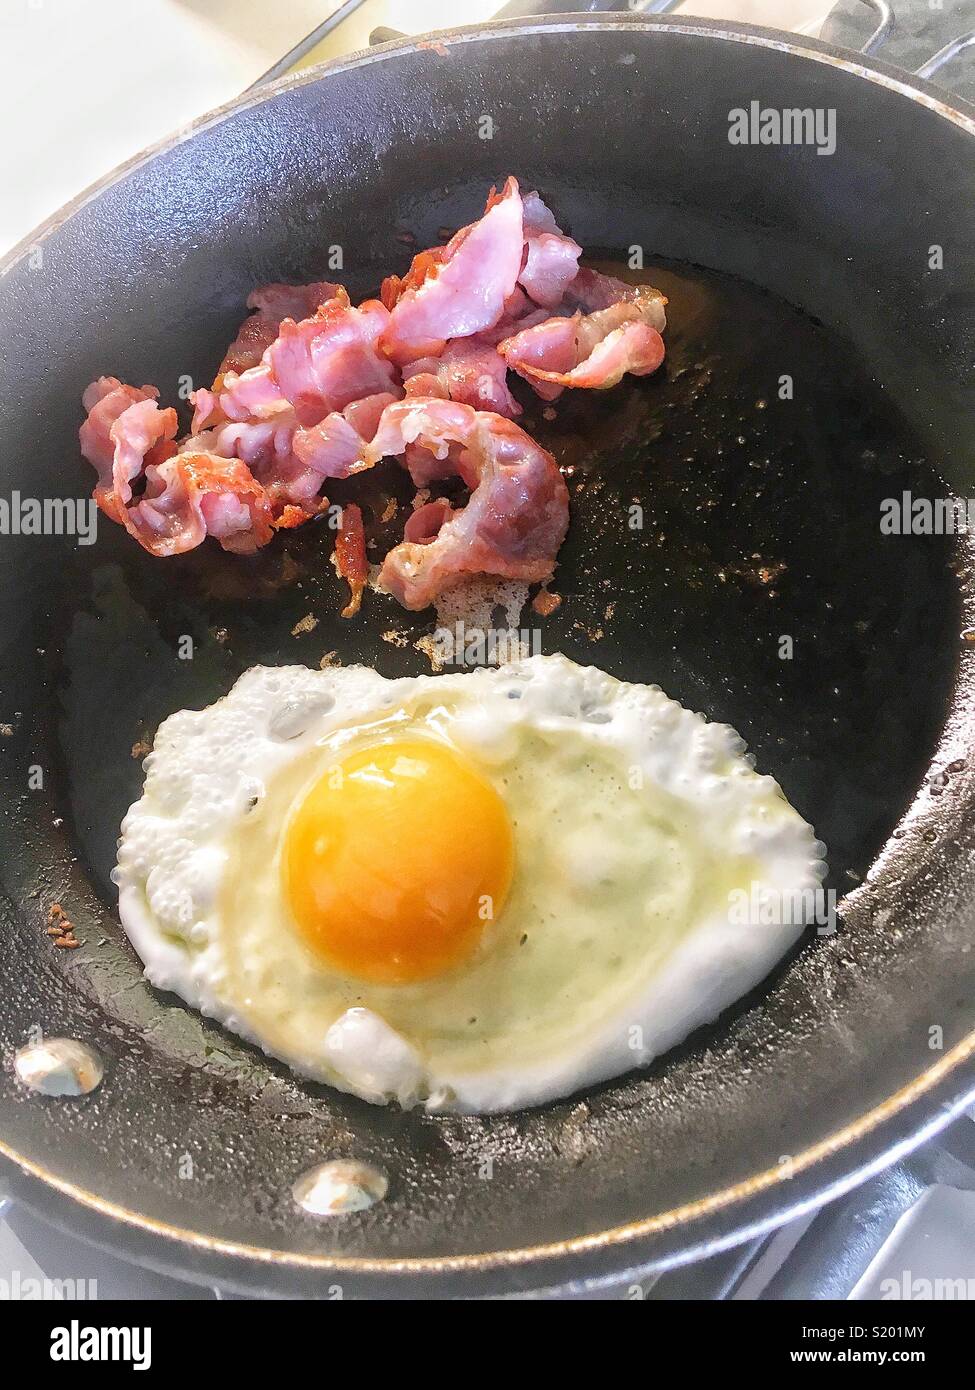 Egg and bacon Stock Photo